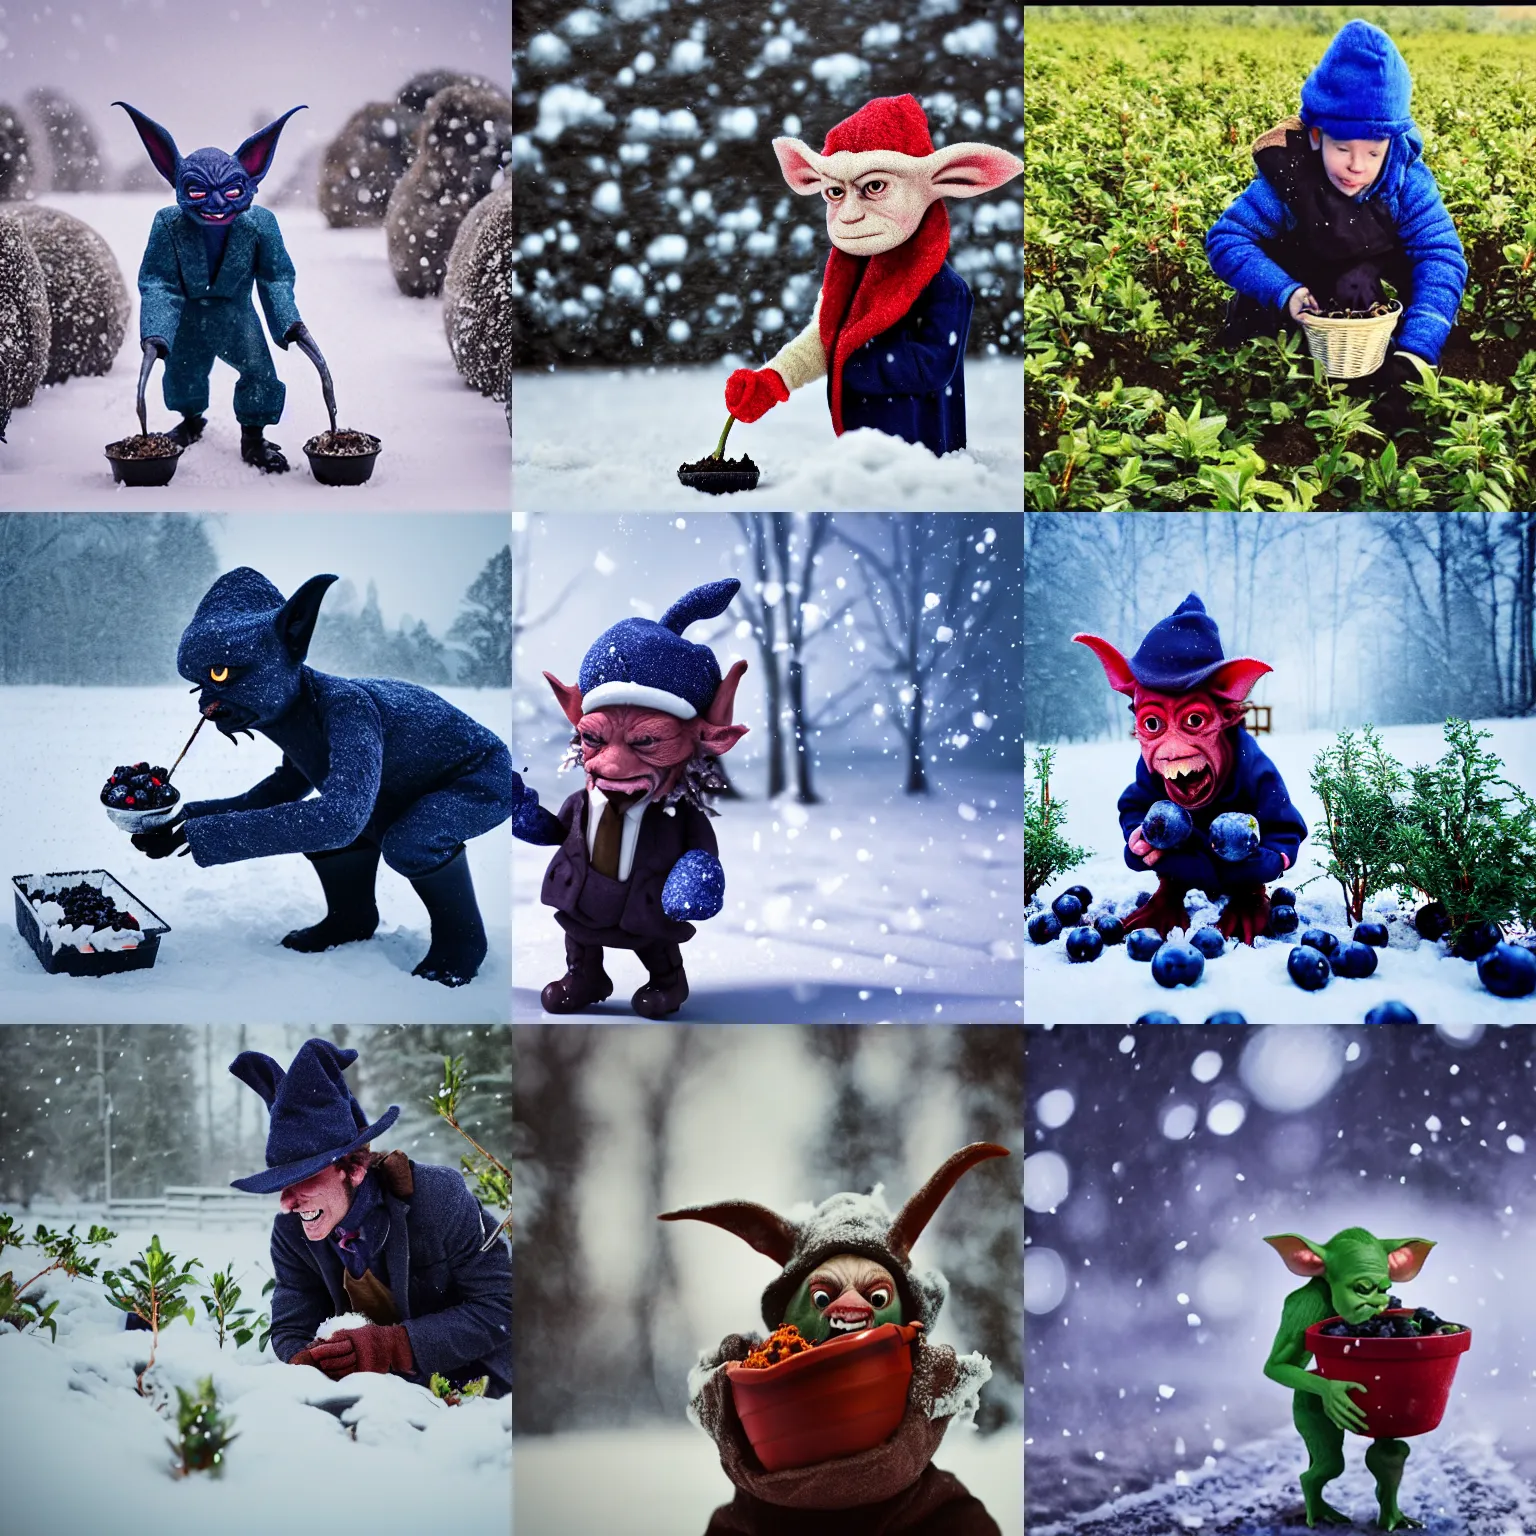 Prompt: a goblin dressed as a ceo planting blueberries in a winter wonderland, cinematic shot